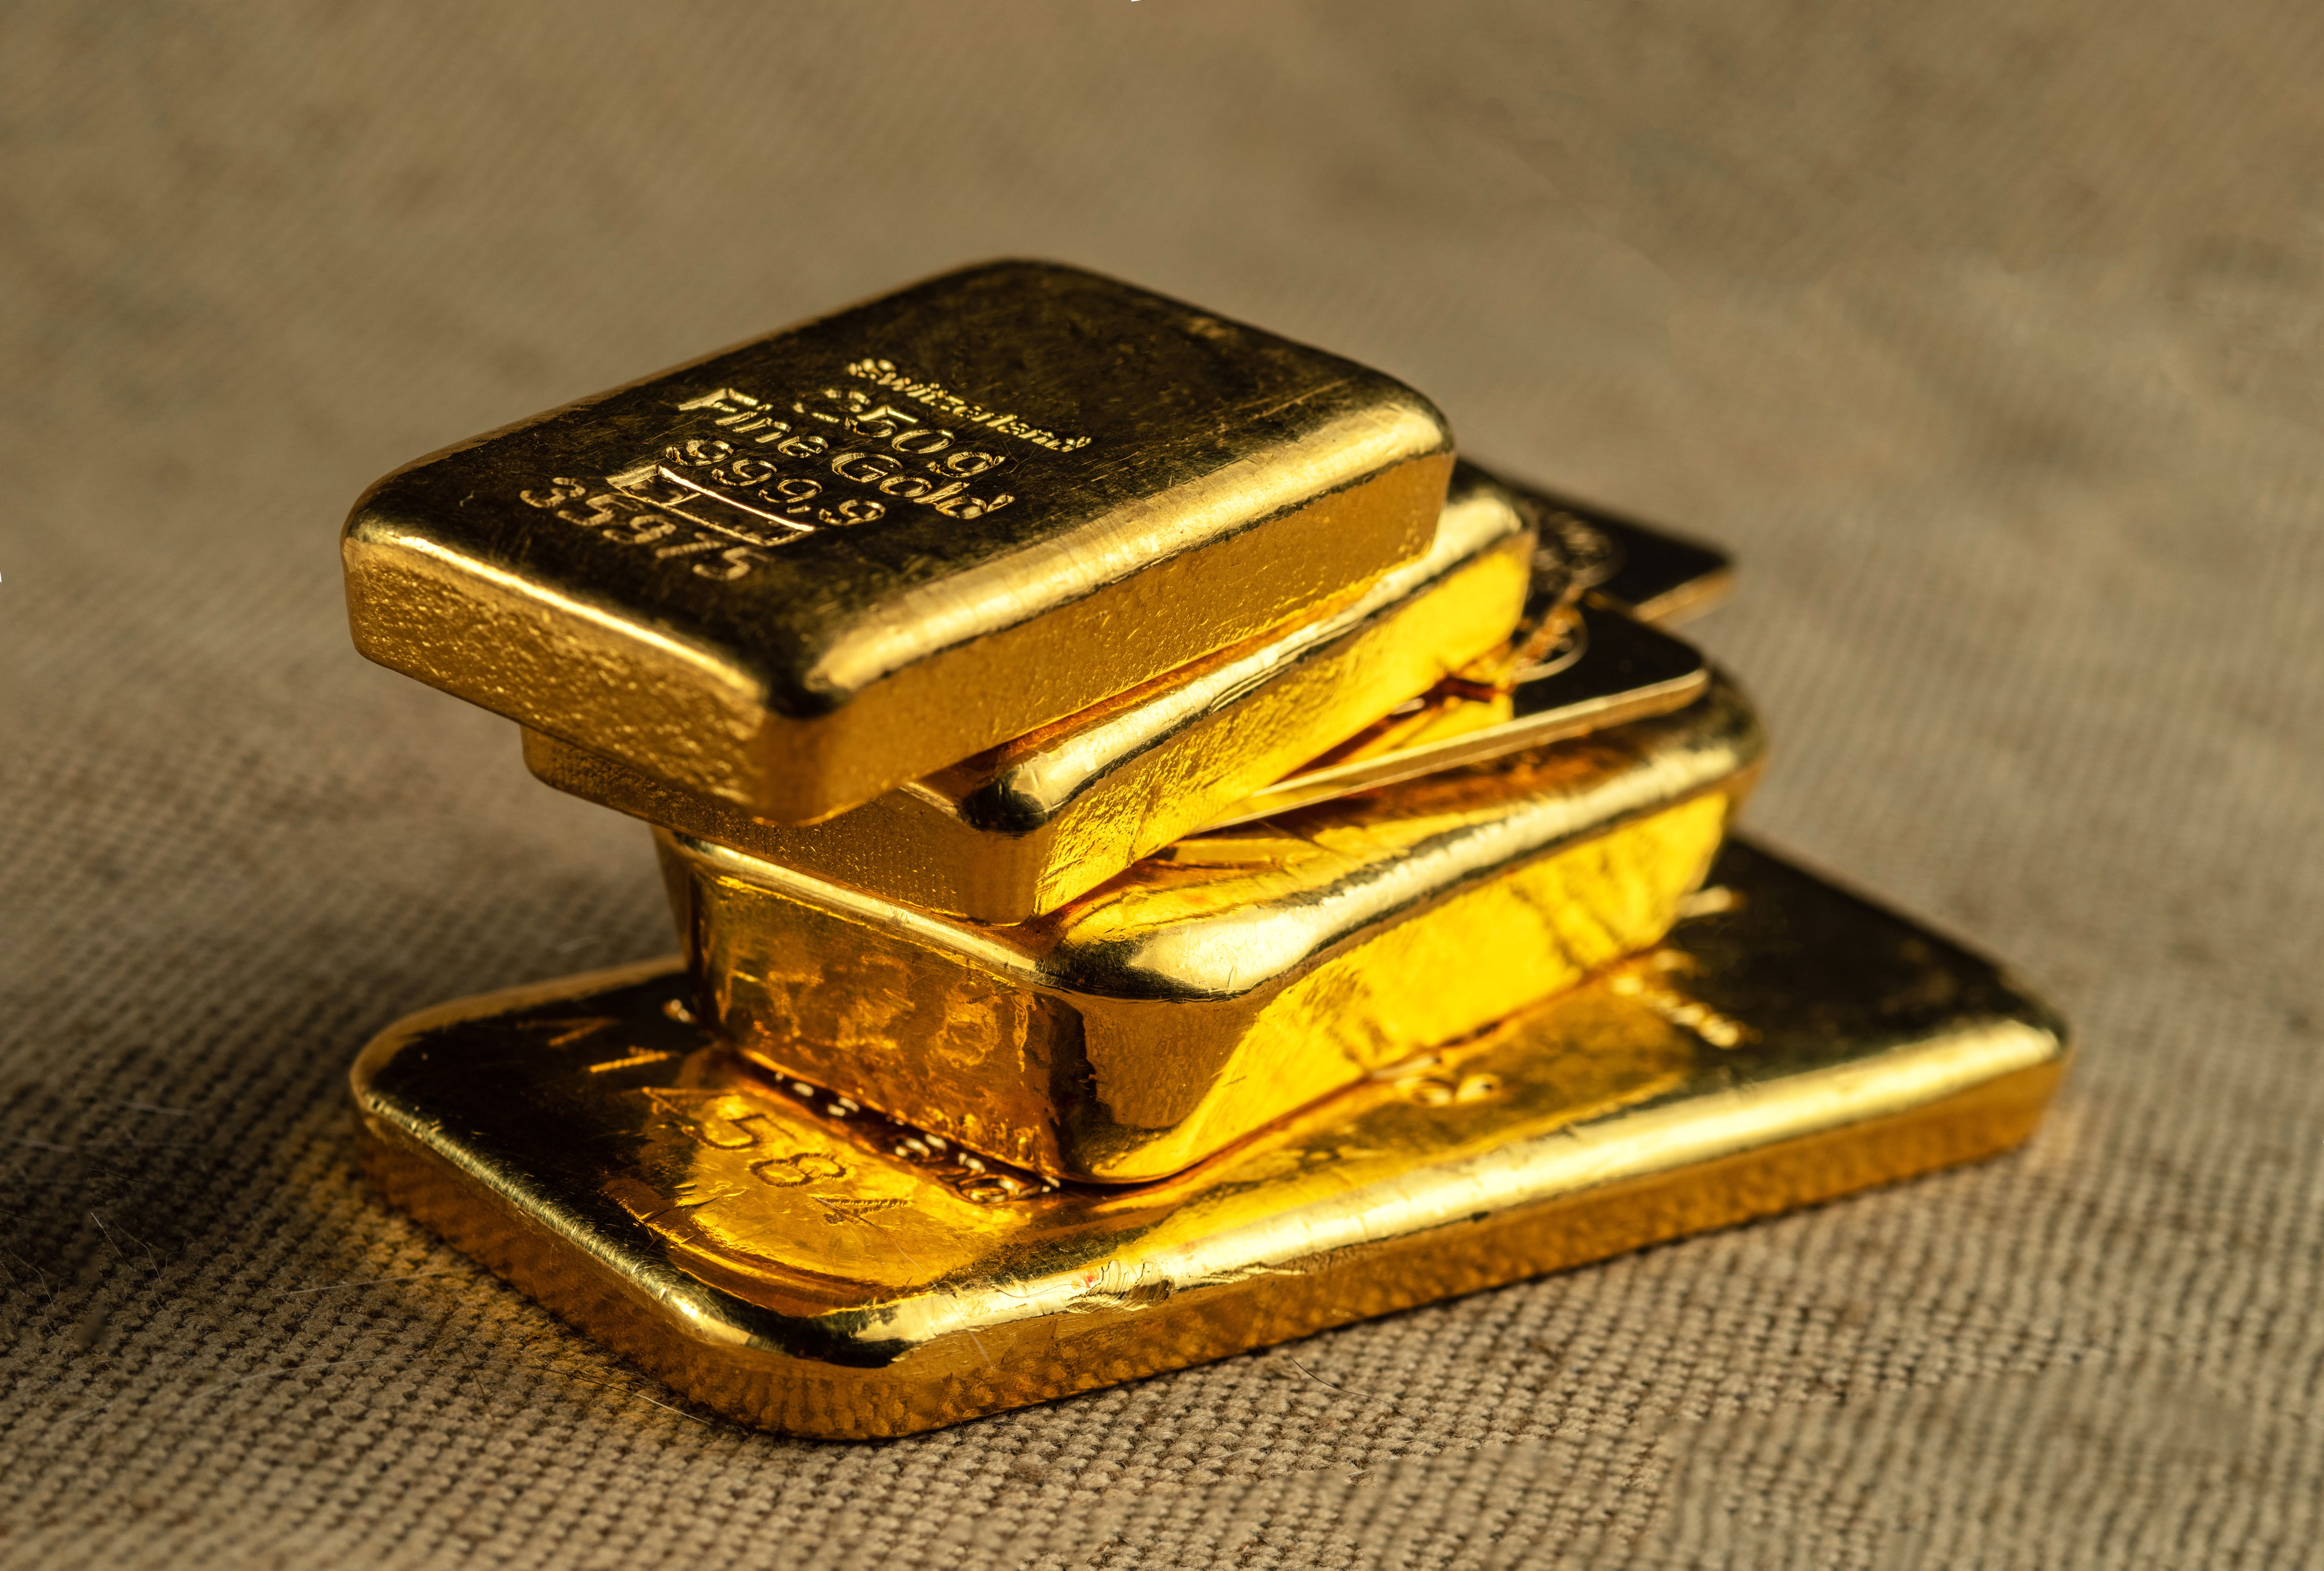 Why Investing in Gold Makes Sense Now: Economic Indicators and Strategic Insights